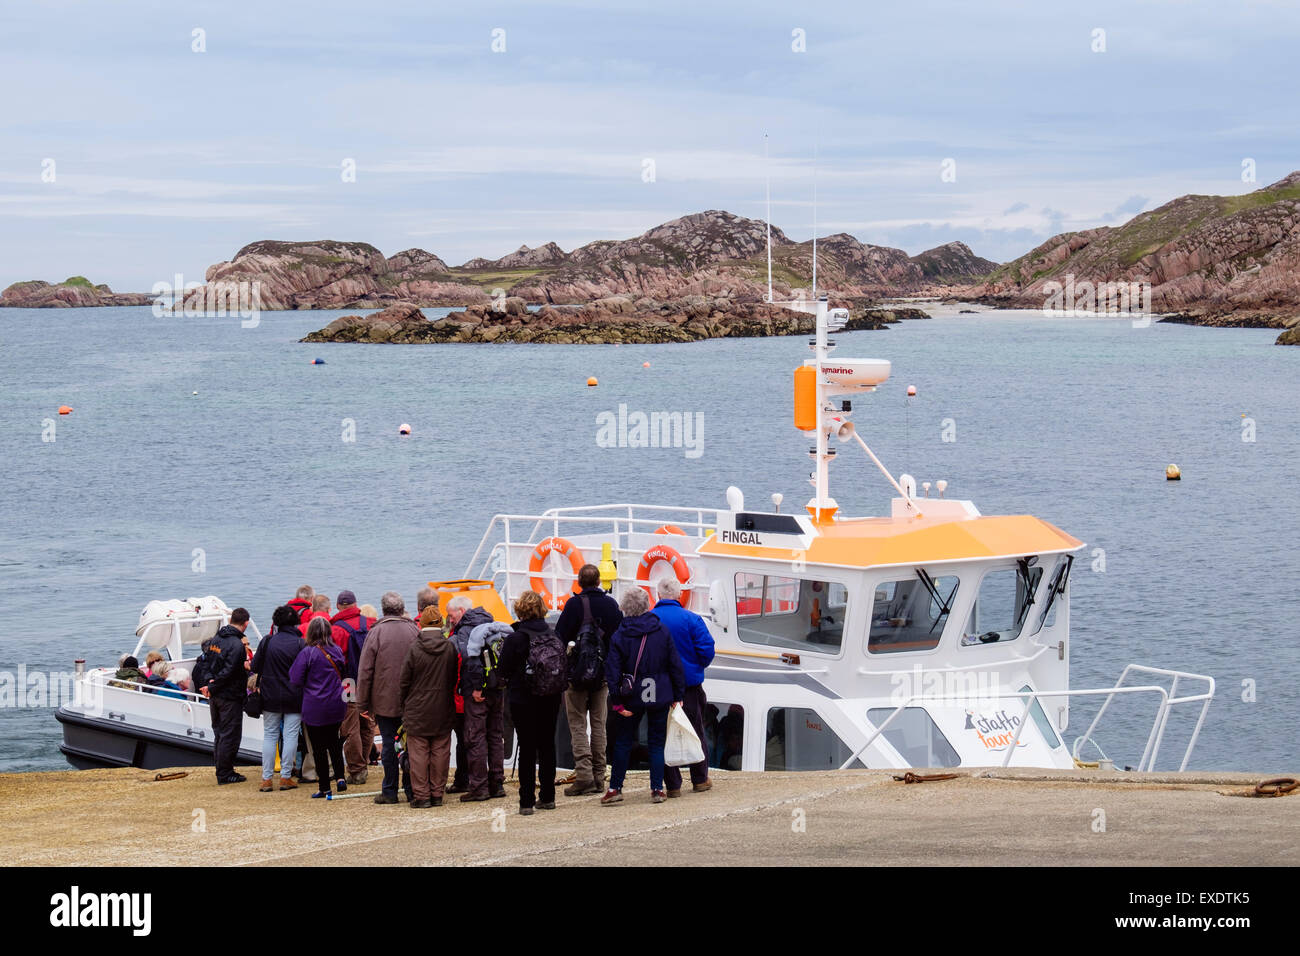 Tourists waiting to board boat for Staffa Island and Fingal's cave tour. Fionnphort, Isle of Mull, Inner Hebrides, Scotland, UK Stock Photo